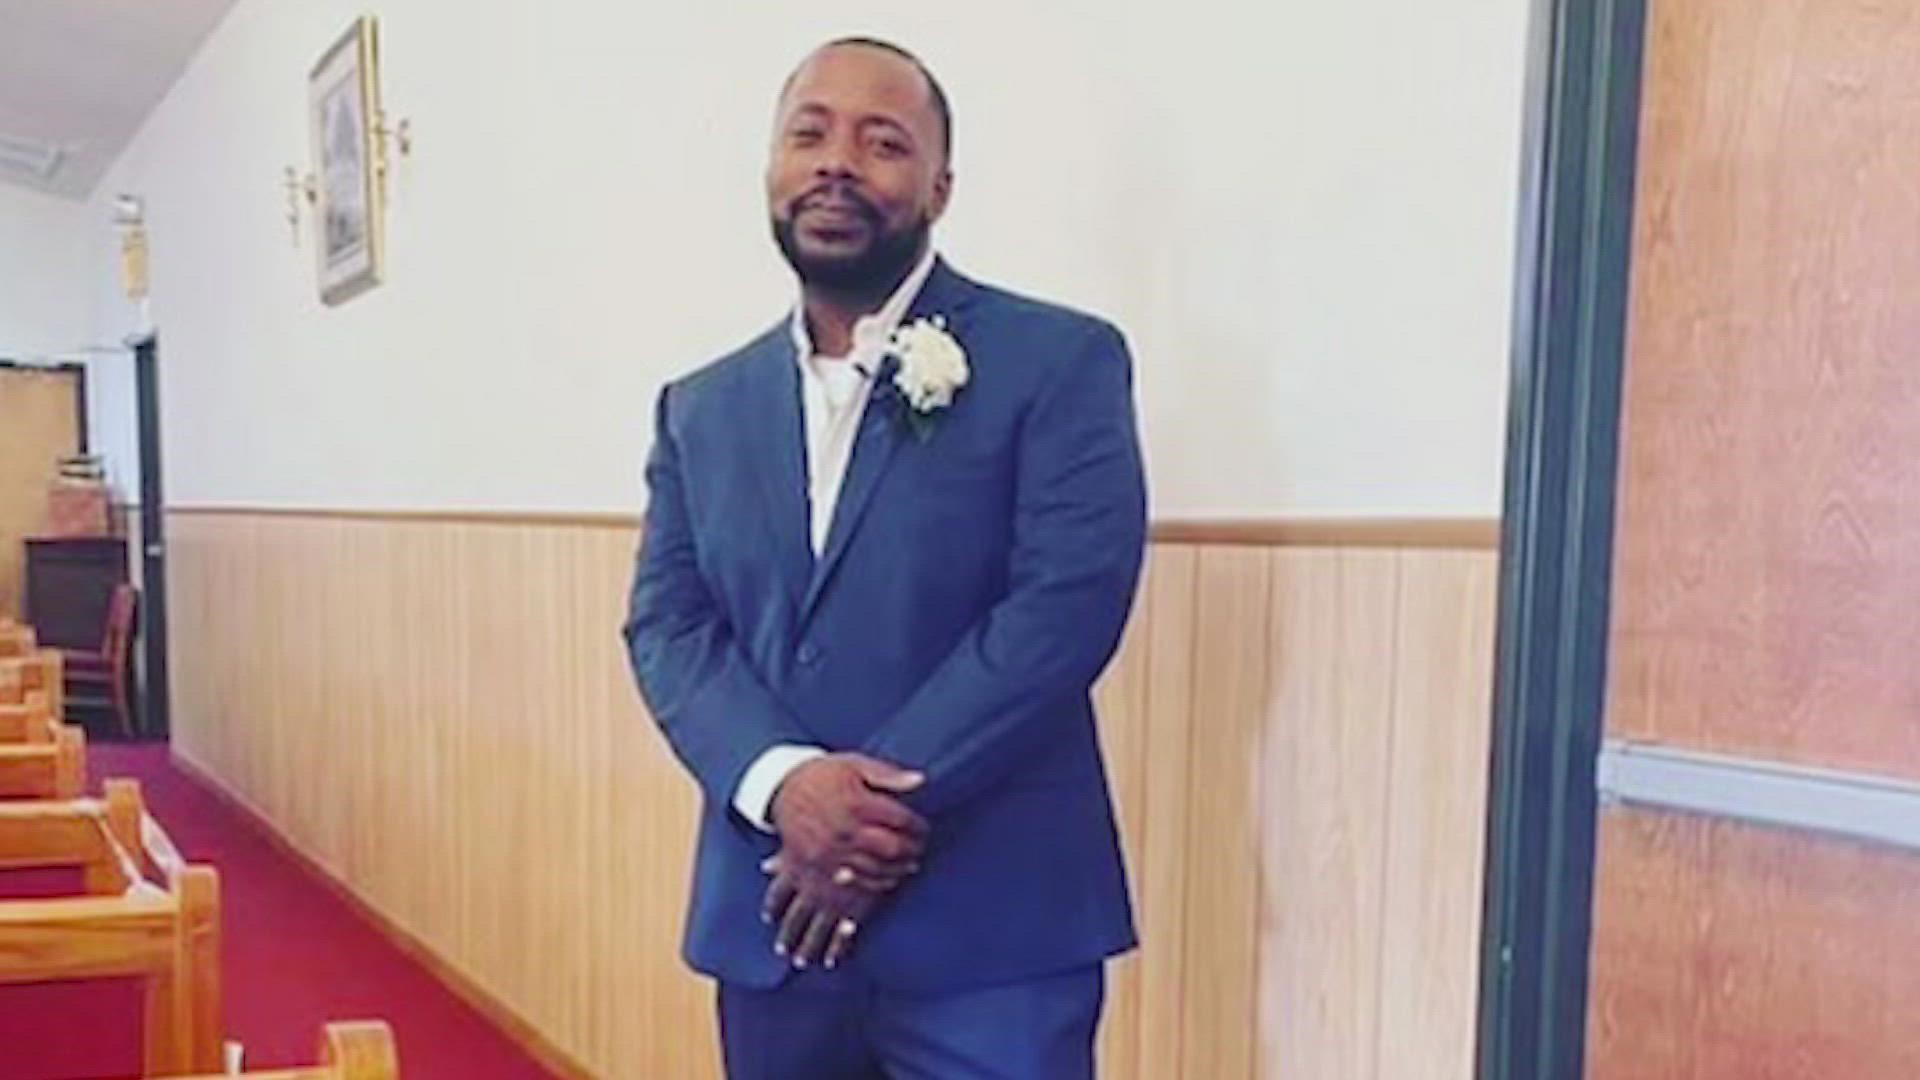 Brandon Broadnax was killed just over a week before he would have turned 35.